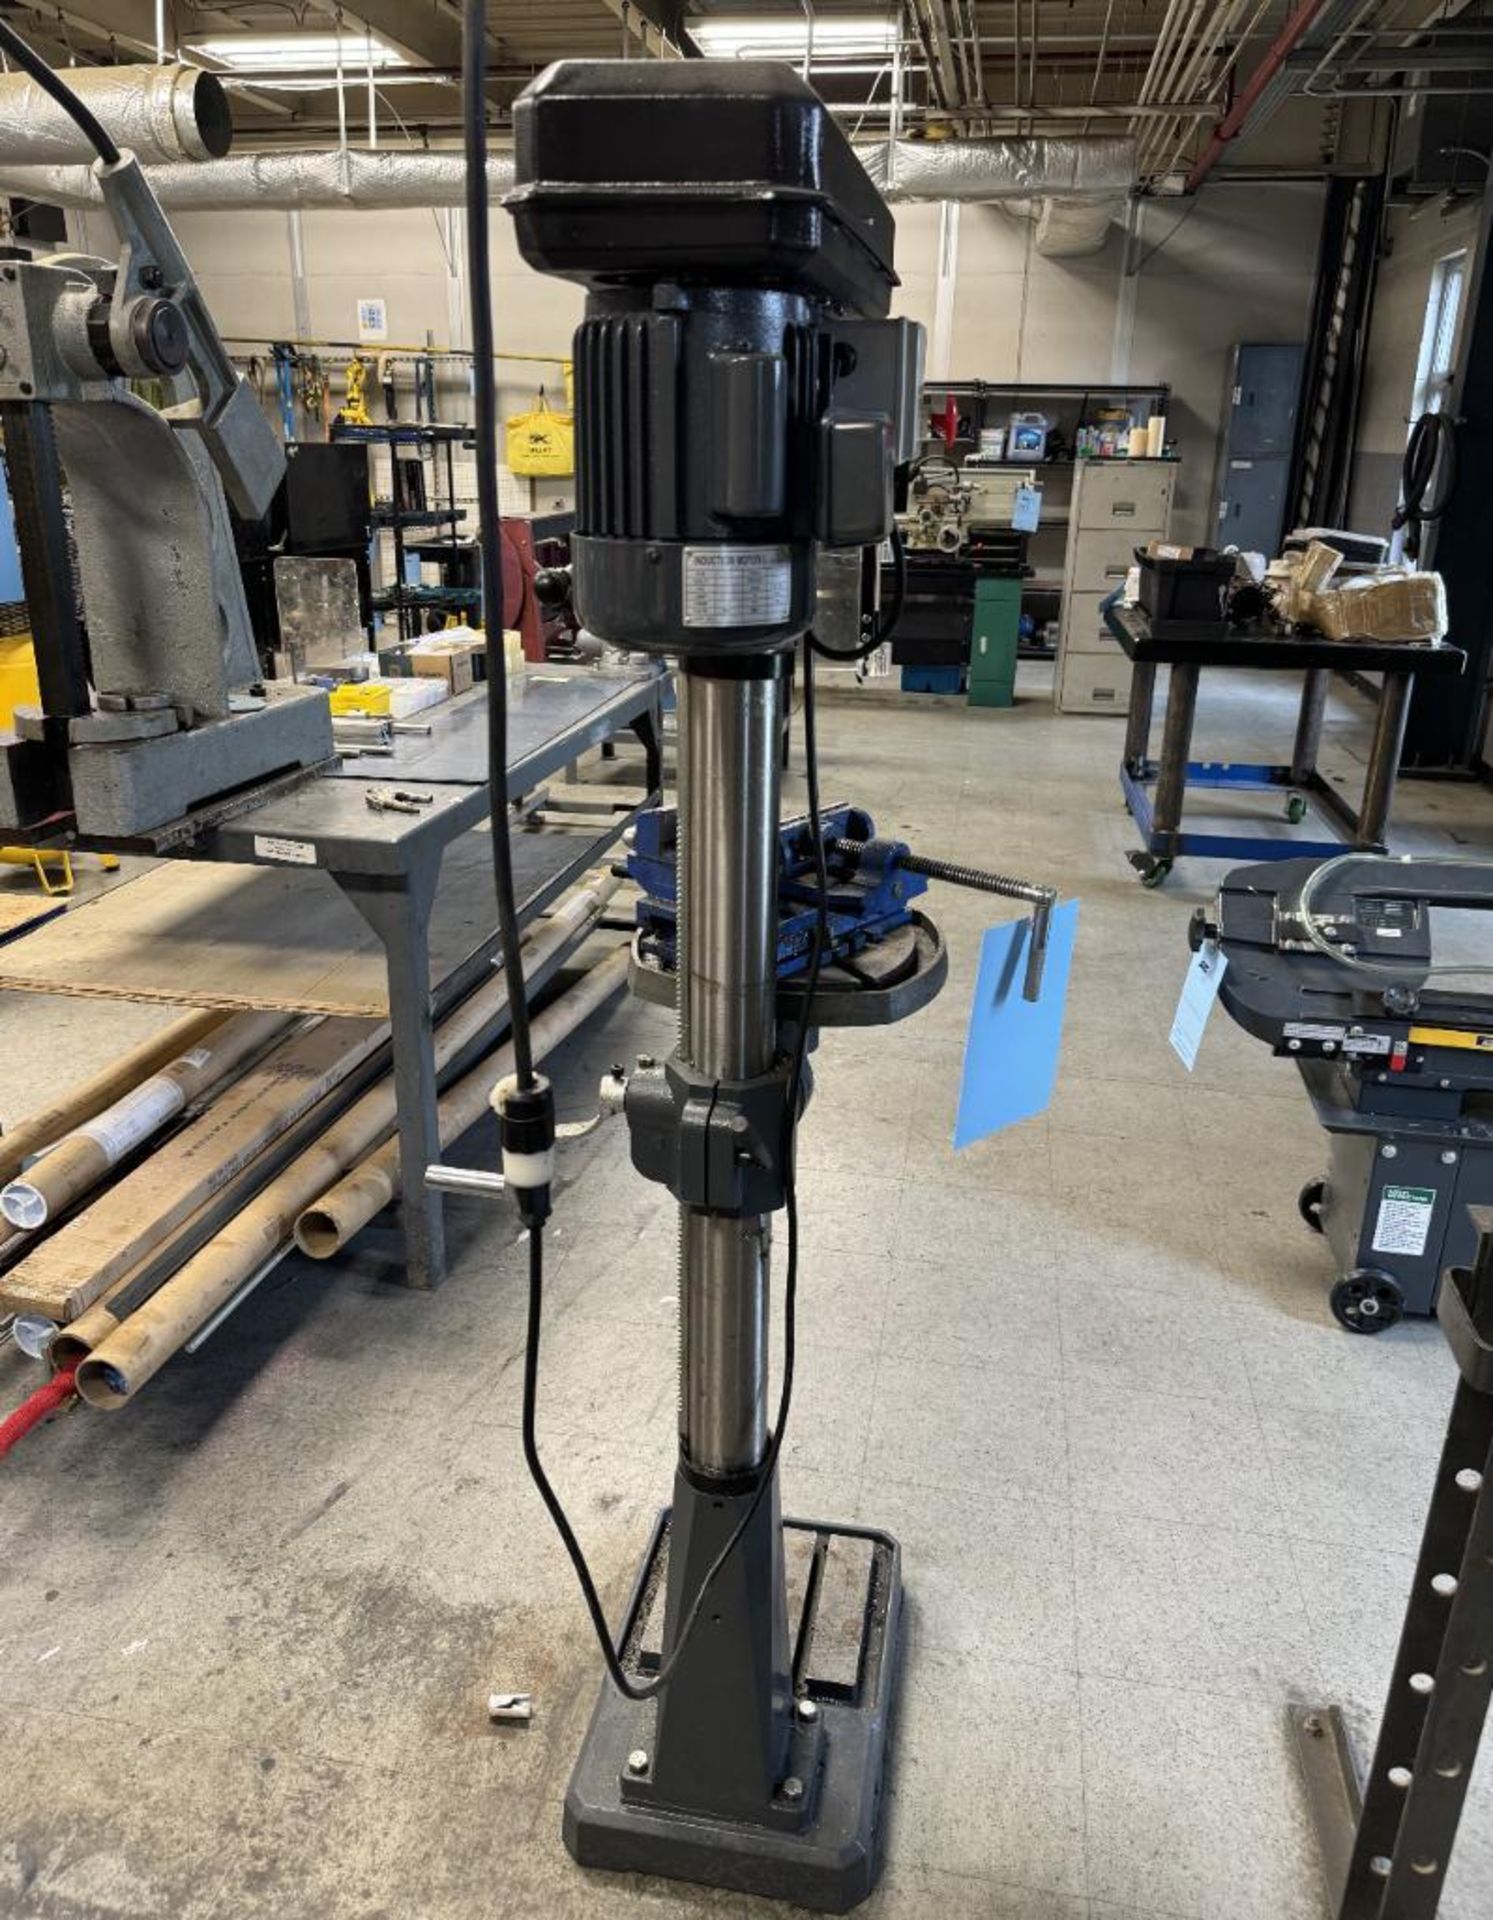 Dake Floor Mounted Drill Press, Model SB-16, Serial# 2103040, Built 2021. With vise. - Image 3 of 6